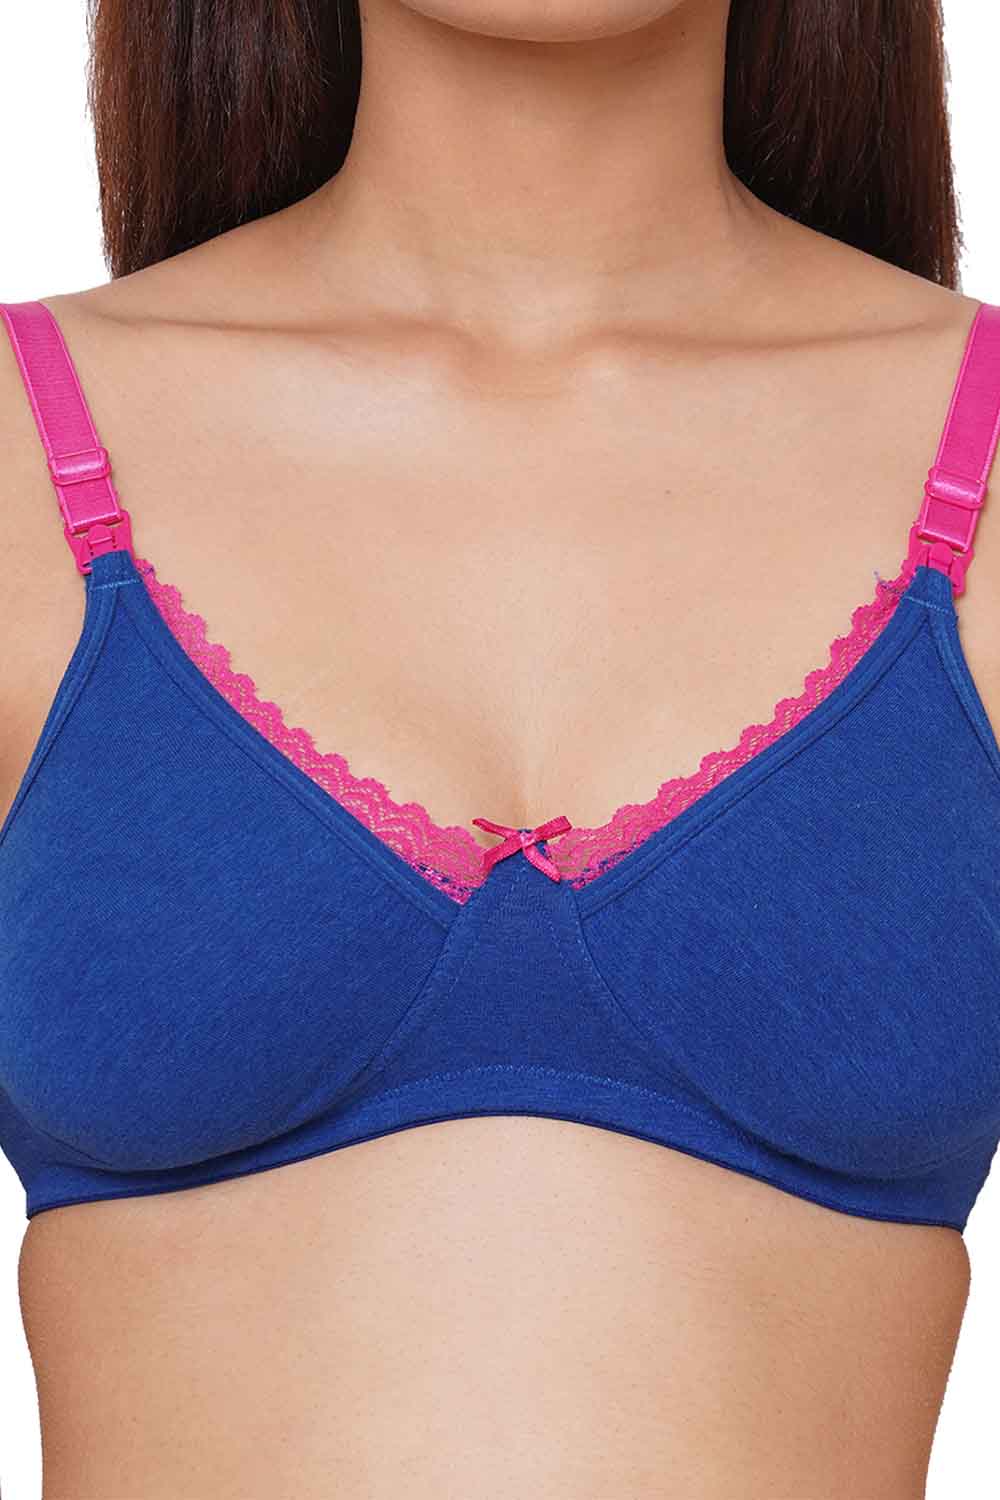 Inner Sense 2 Pack Organic Antimicrobial Soft Feeding Bra Multicolor Online  in Oman, Buy at Best Price from  - db7e6ae9d3036